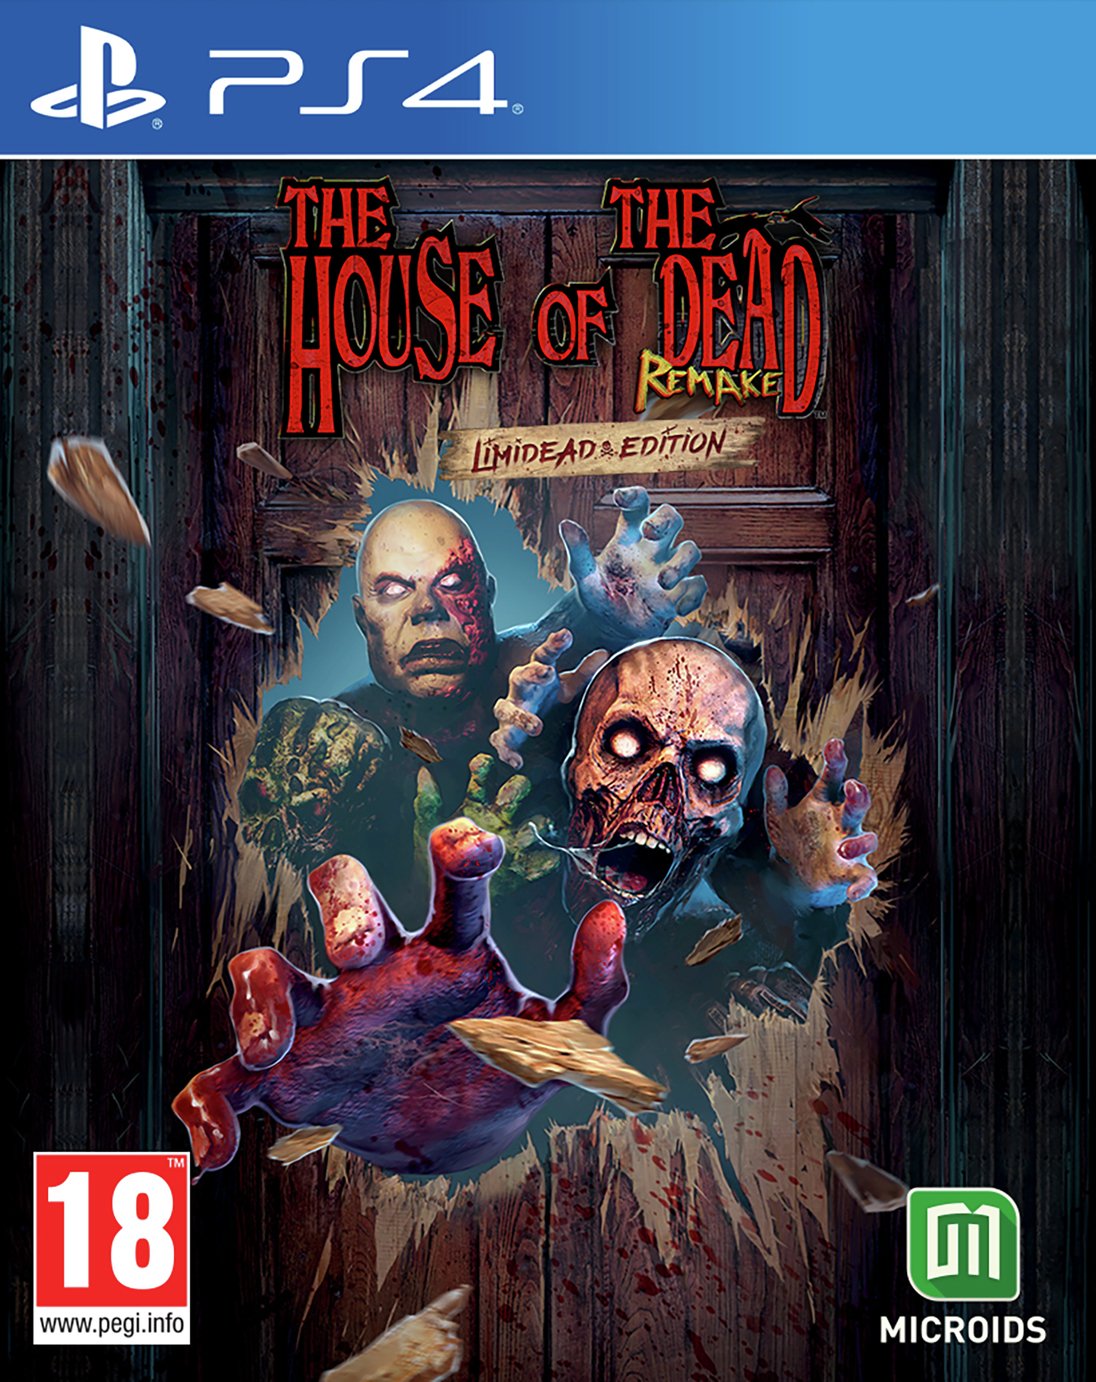 The House Of The Dead: Remake Limidead Edition PS4 Game